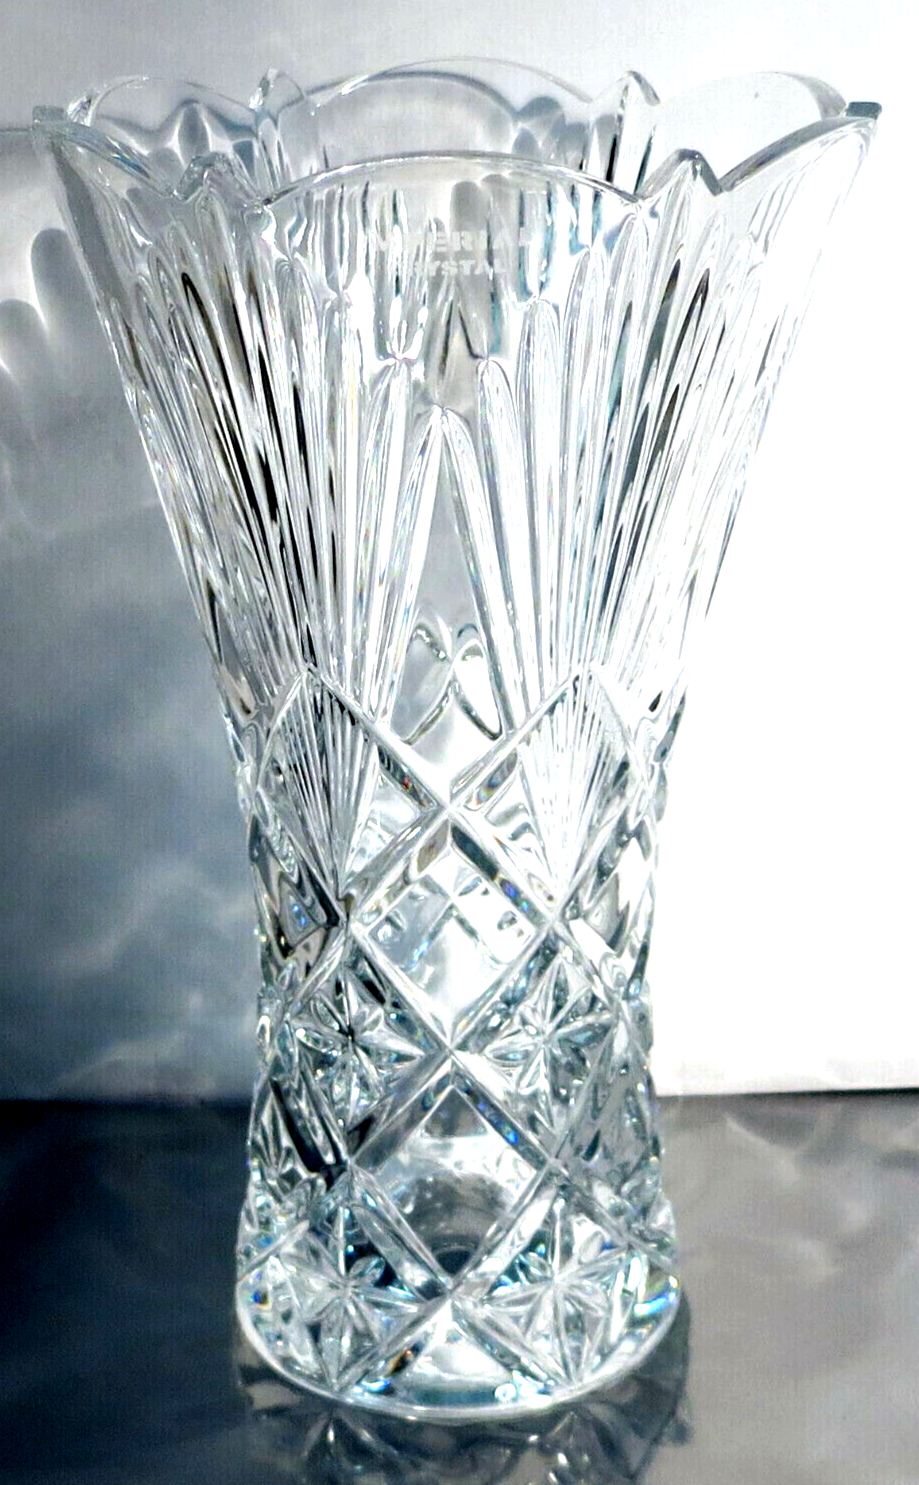 Primary image for Imperial Crystal 9.5 inch Laser Engraved 24% Lead Crystal Vase Slovakia